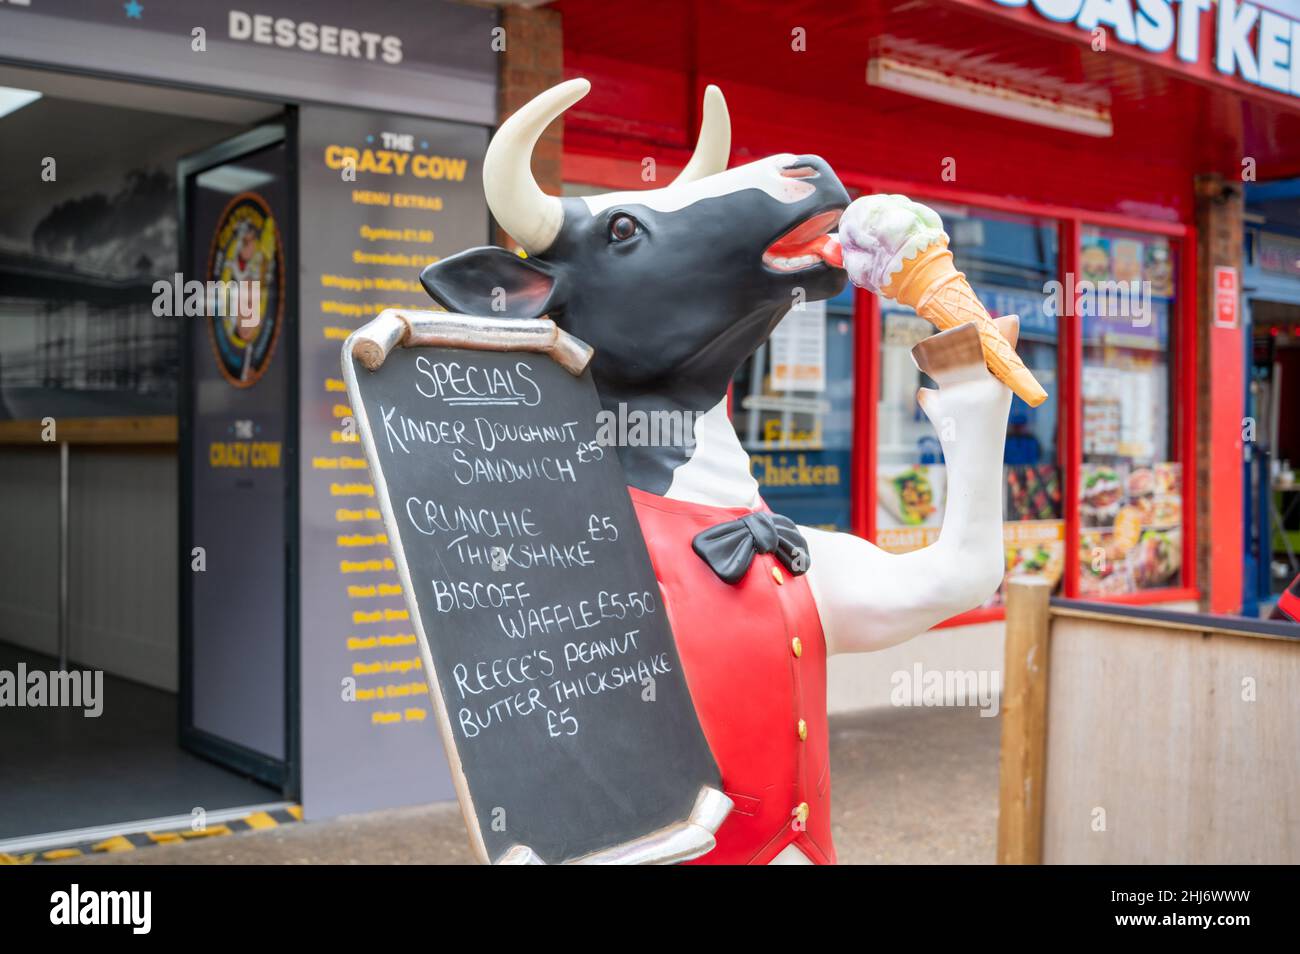 A model cow advertisement holding a specials menu board outside the Crazy Cow restaurant in the seaside town of Cromer UK Stock Photo